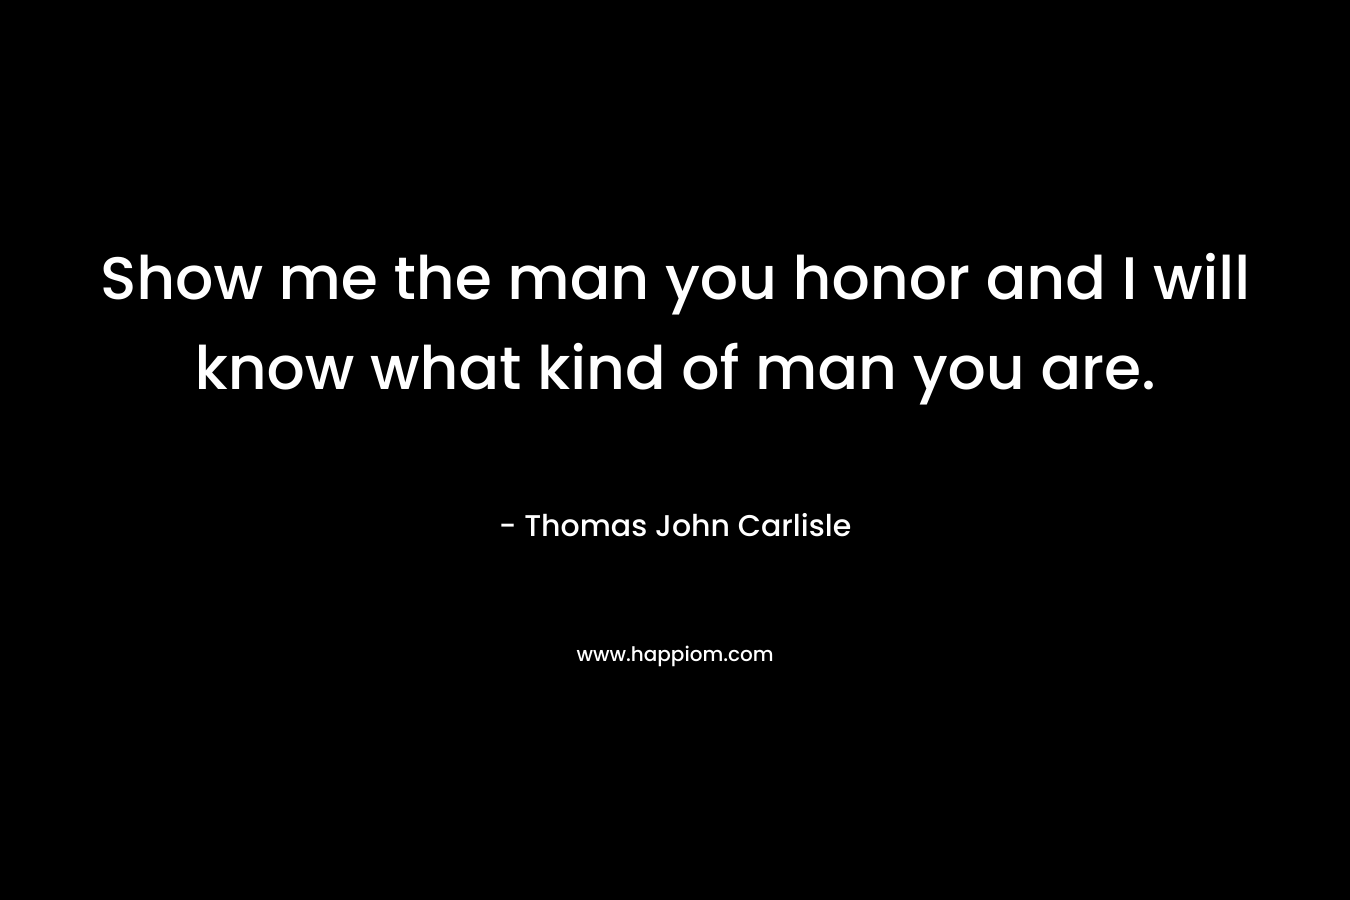 Show me the man you honor and I will know what kind of man you are.